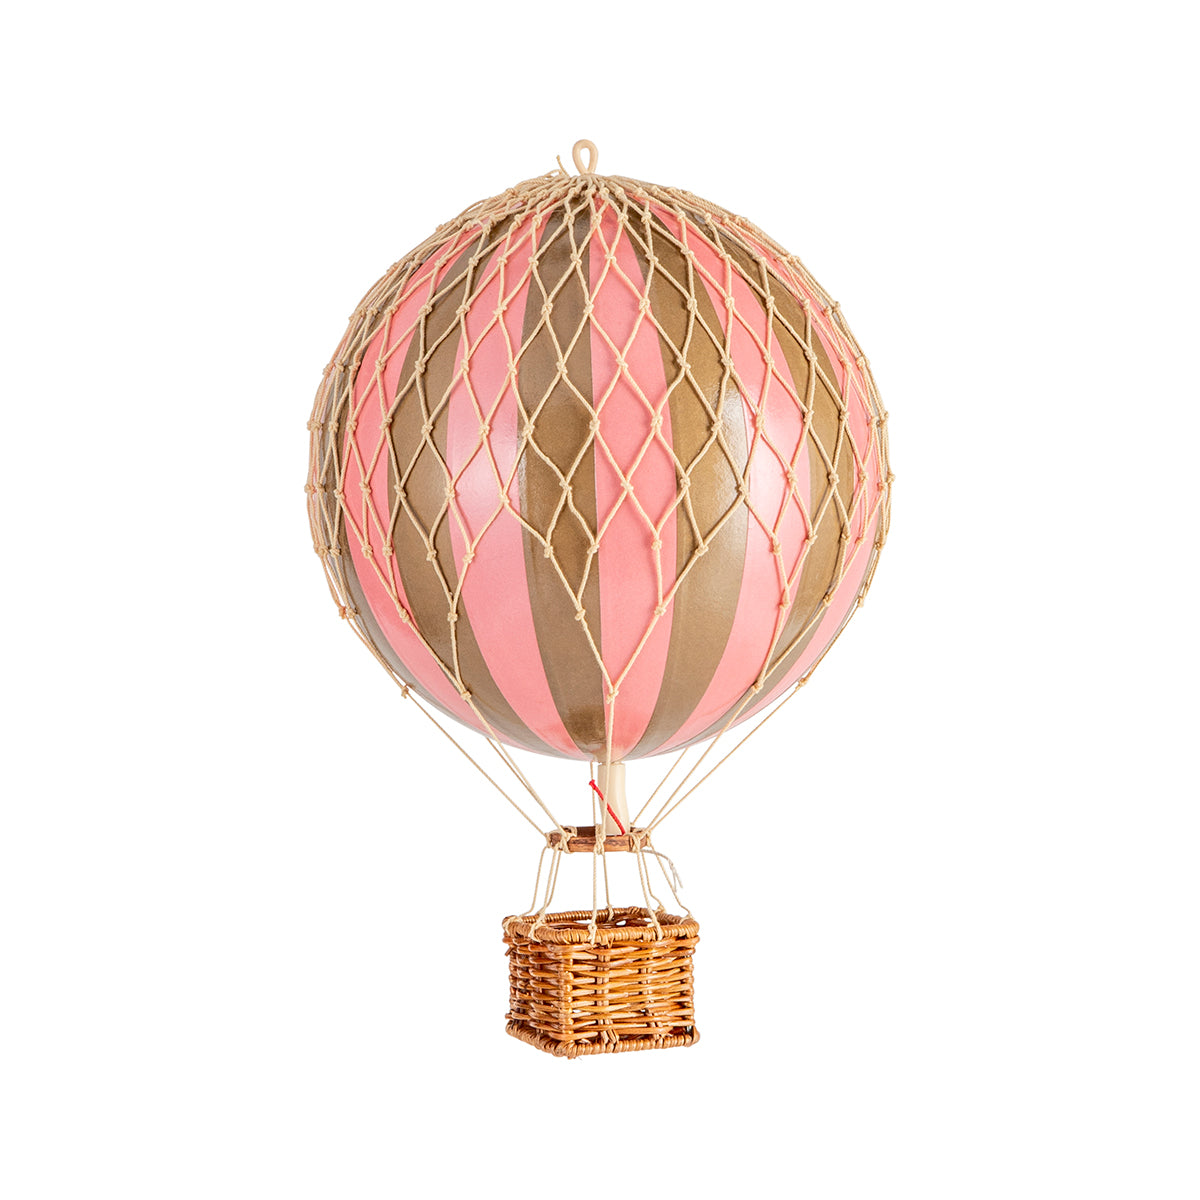 A Wonderen Small Hot Air Balloon - Travels Light in pink and brown floats against a white background.